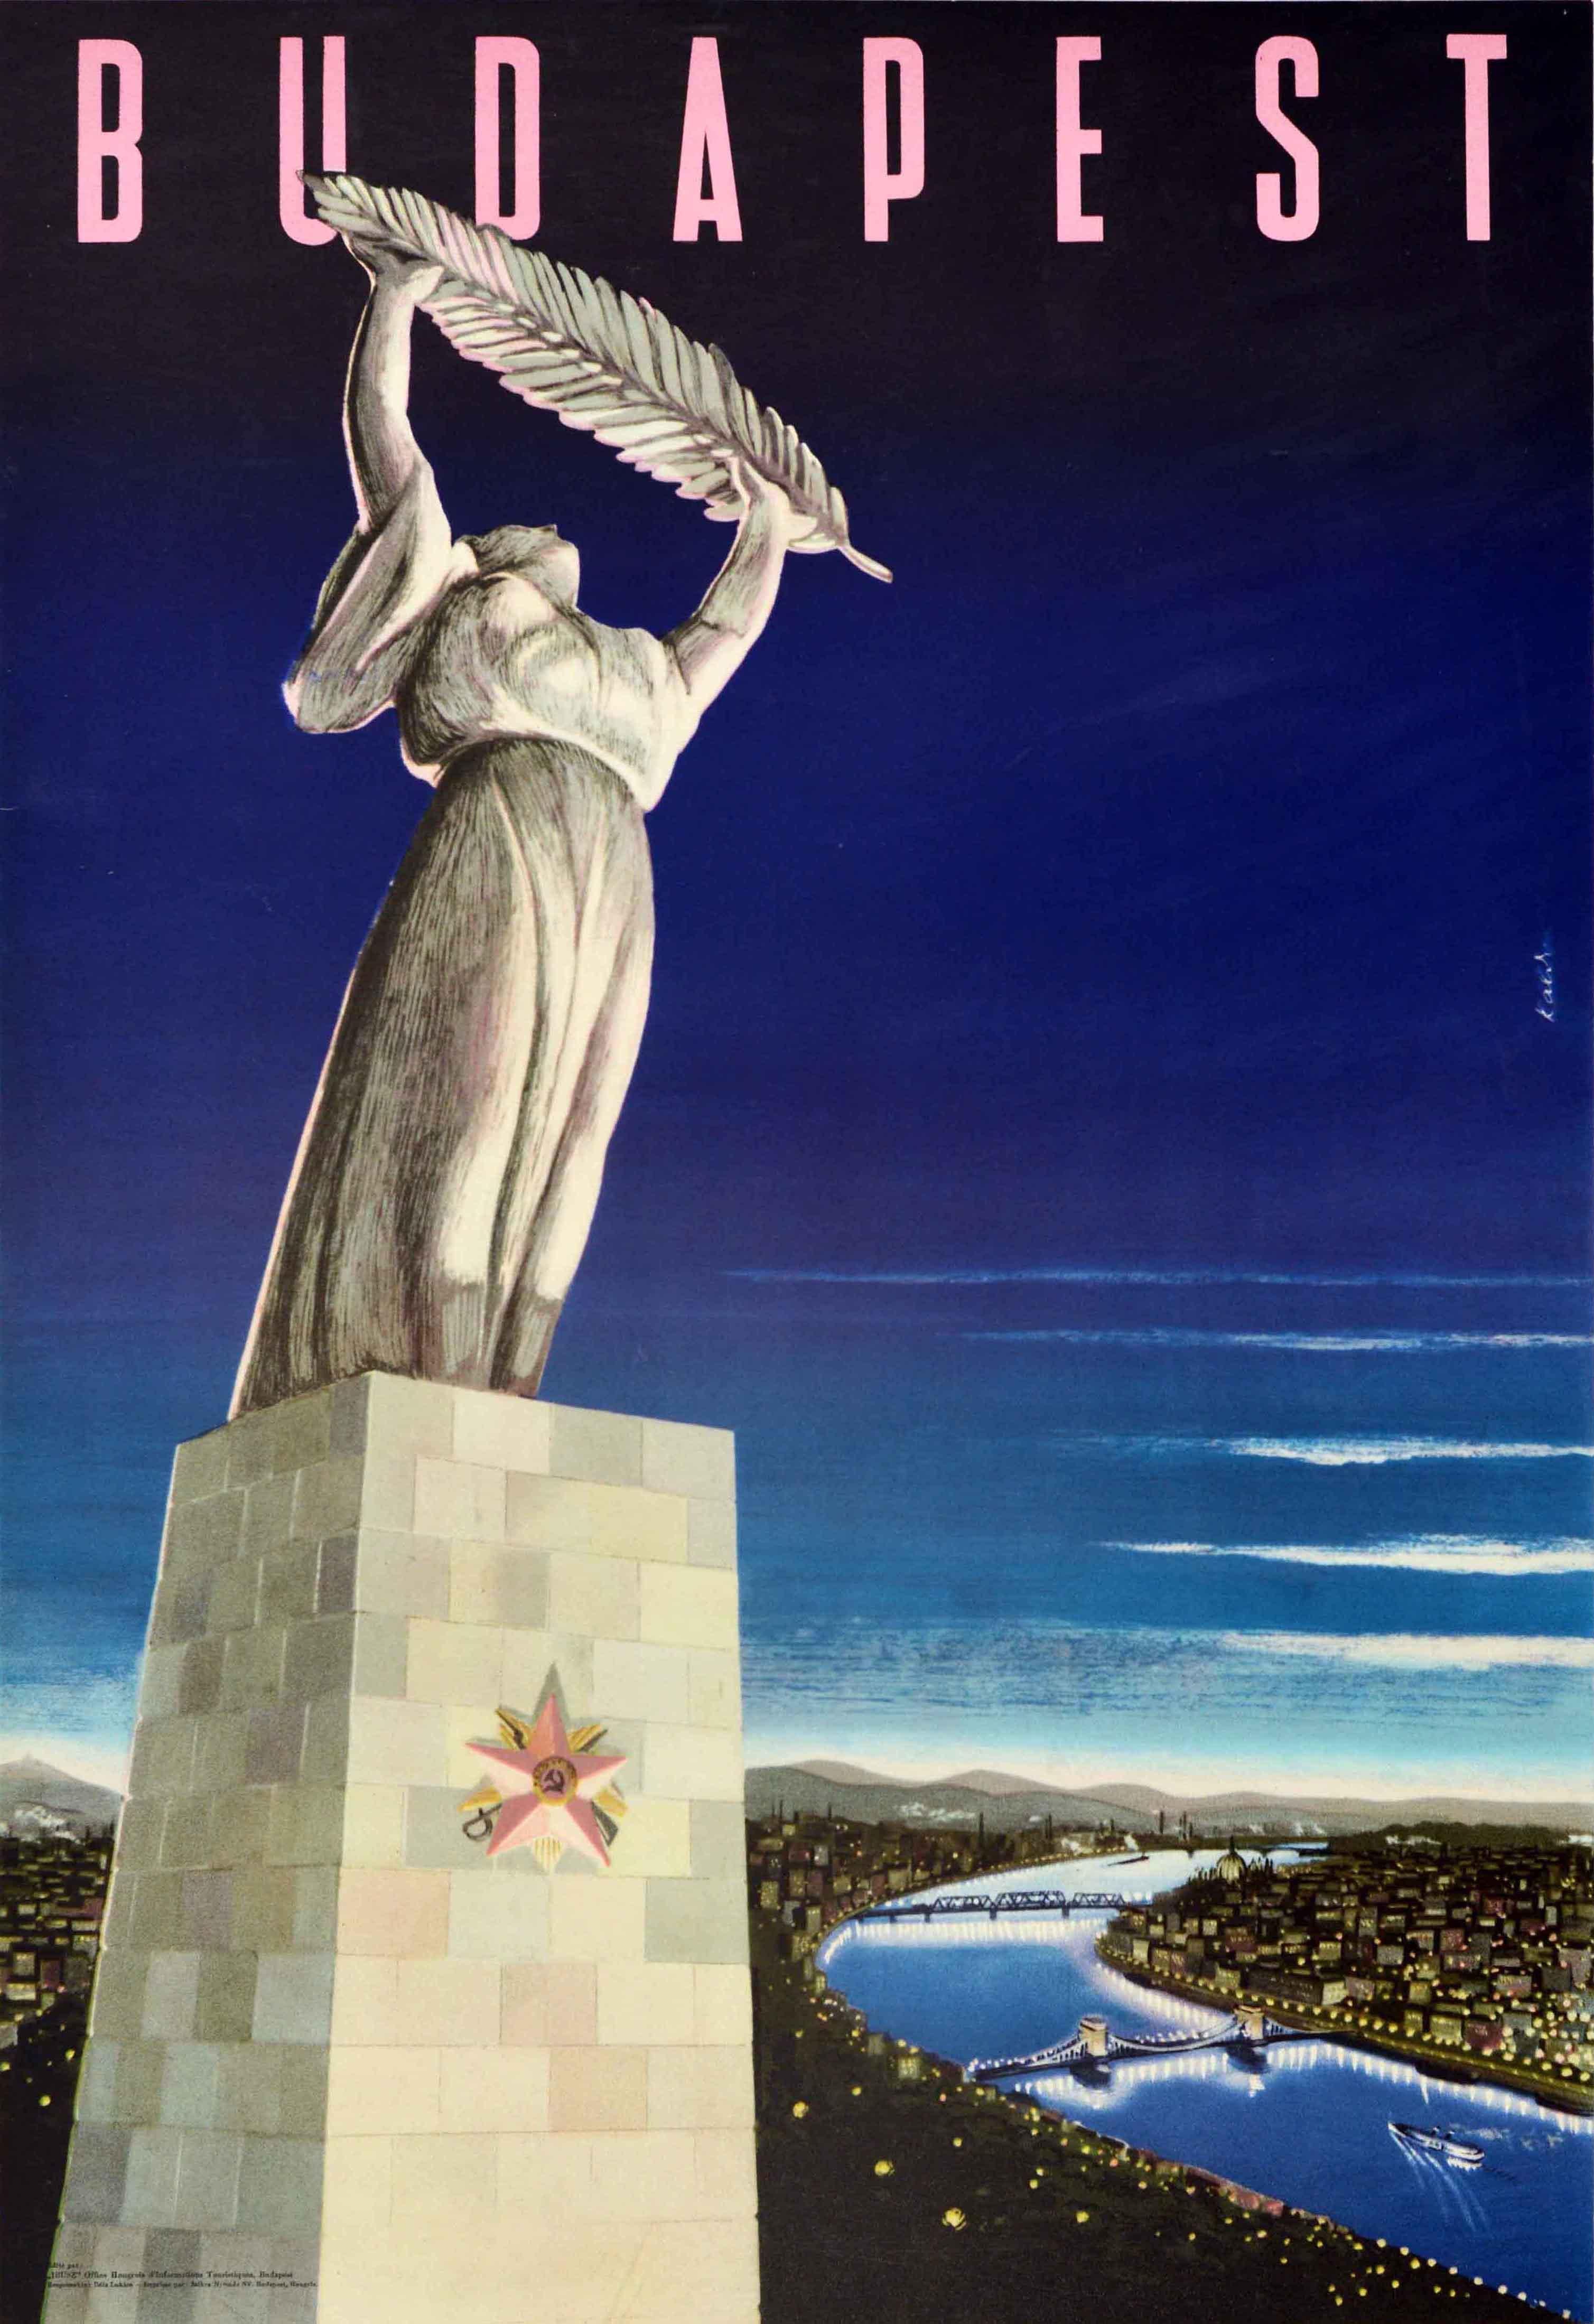 Original vintage travel poster for Budapest Hungary featuring a stunning illustration of the Liberty Statue depicted as a lady in a long dress holding a palm leaf towering over the night city with boats and bridges on the Danube river and buildings